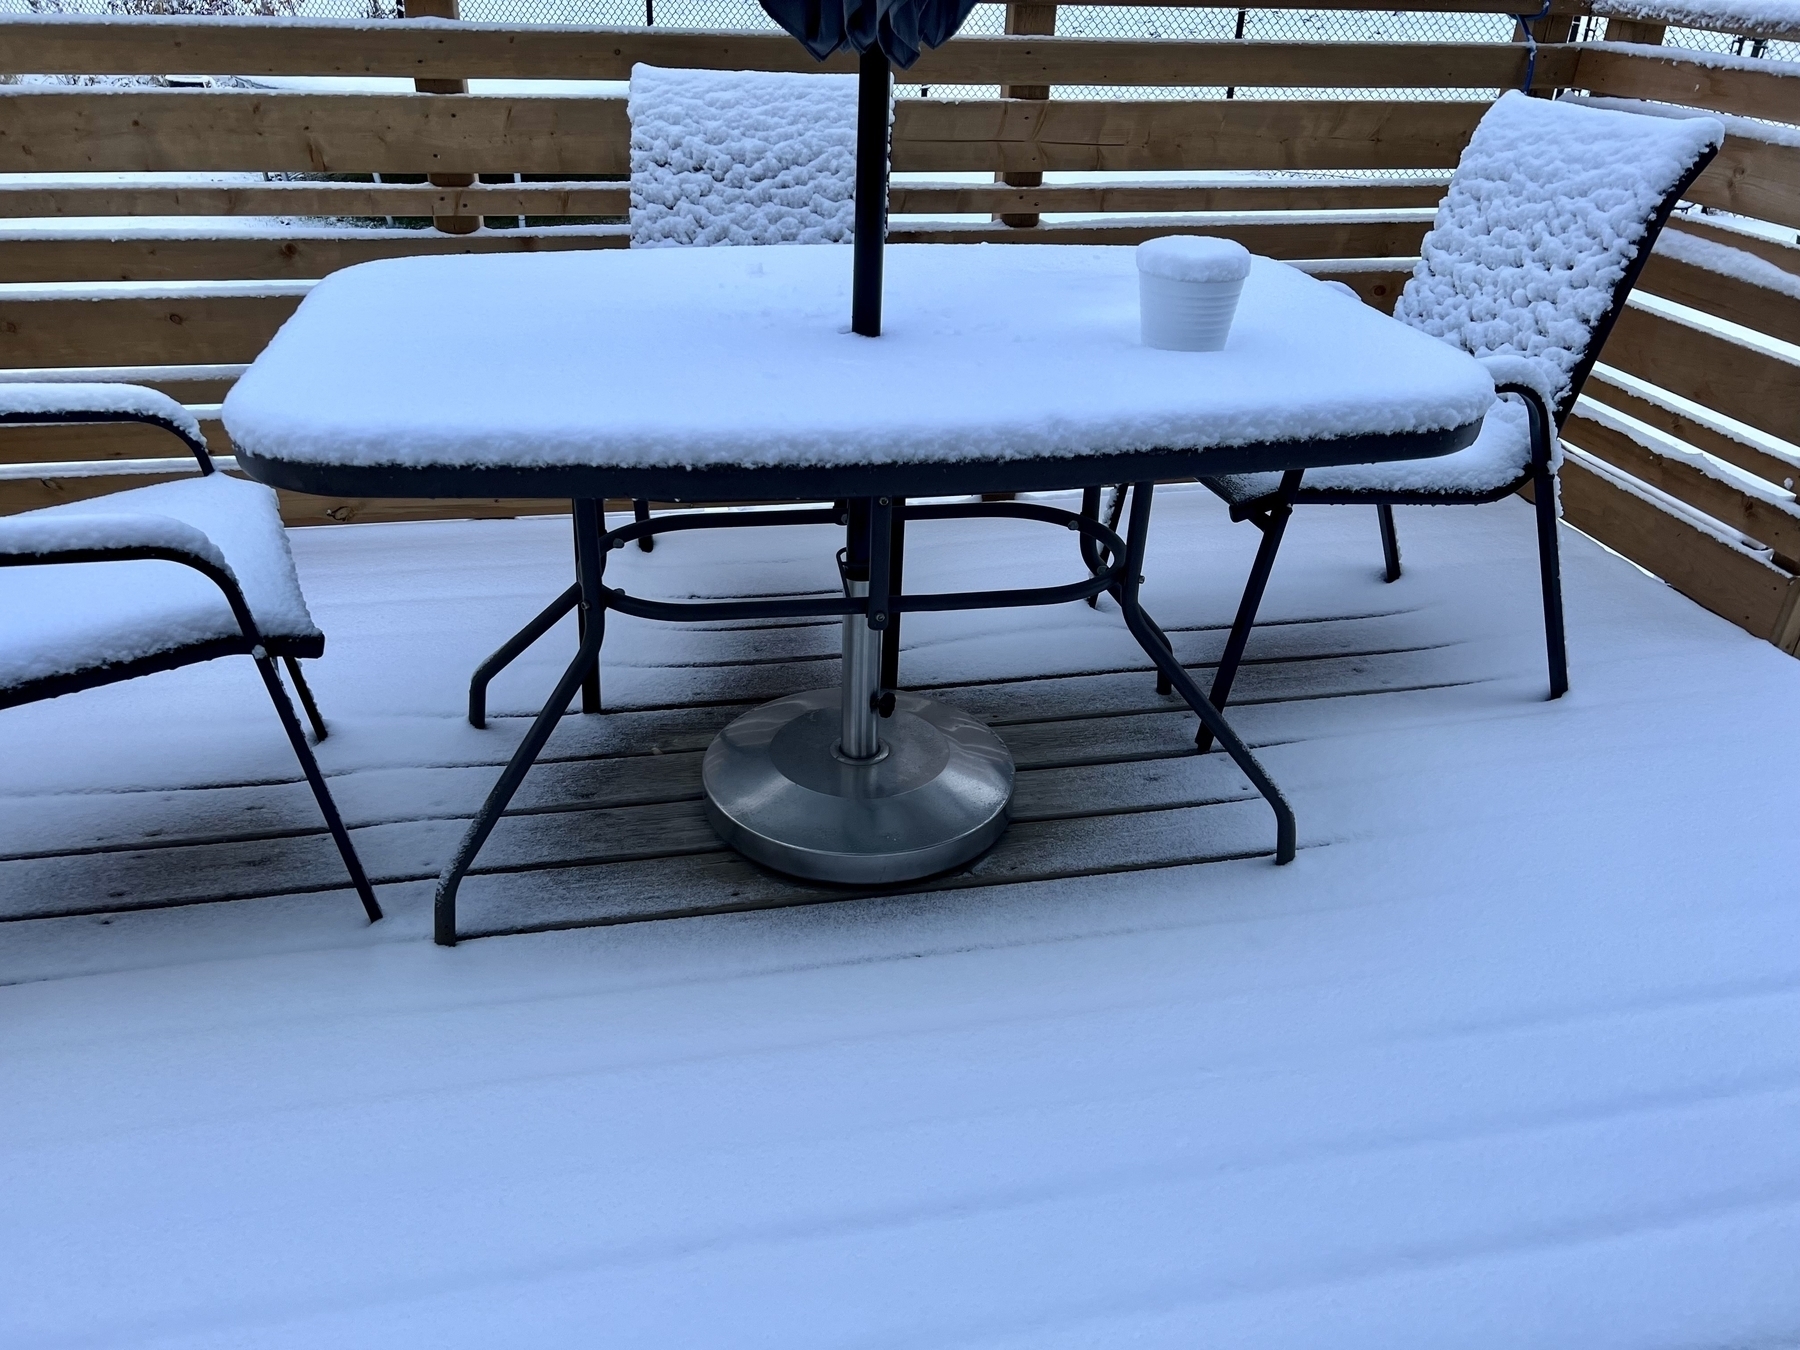 Deck with table and 2 chairs all with a covering of an inch or two of snow. 